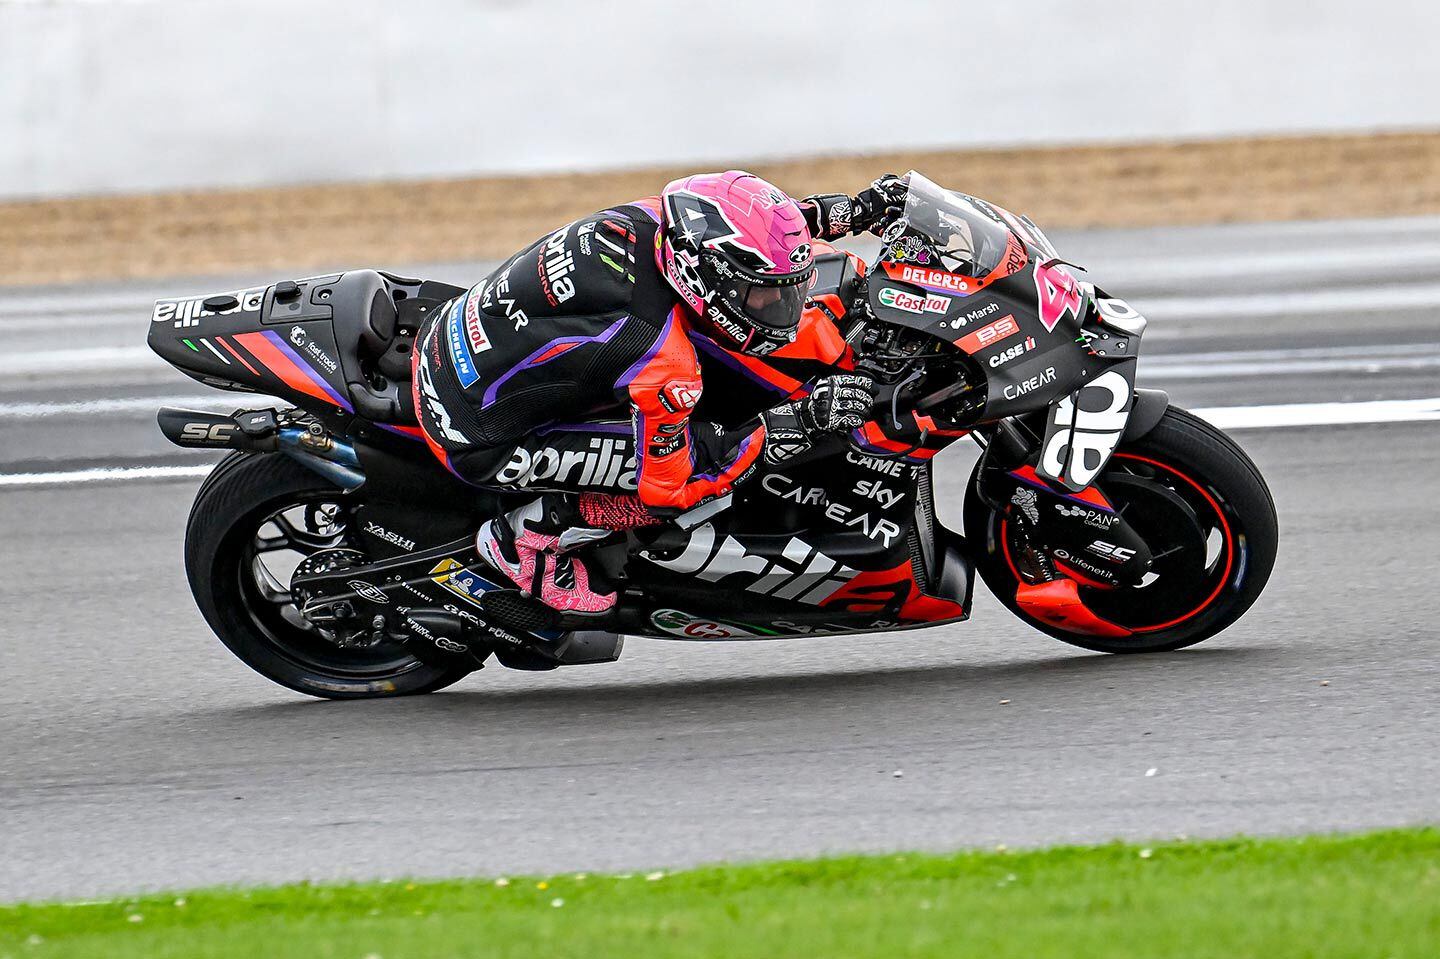 Aleix Espargaró and some other riders, like KTM’s Jack Miller, were rather open about bike setup used in the wet conditions experienced at Silverstone. The move? Shorter and softer.